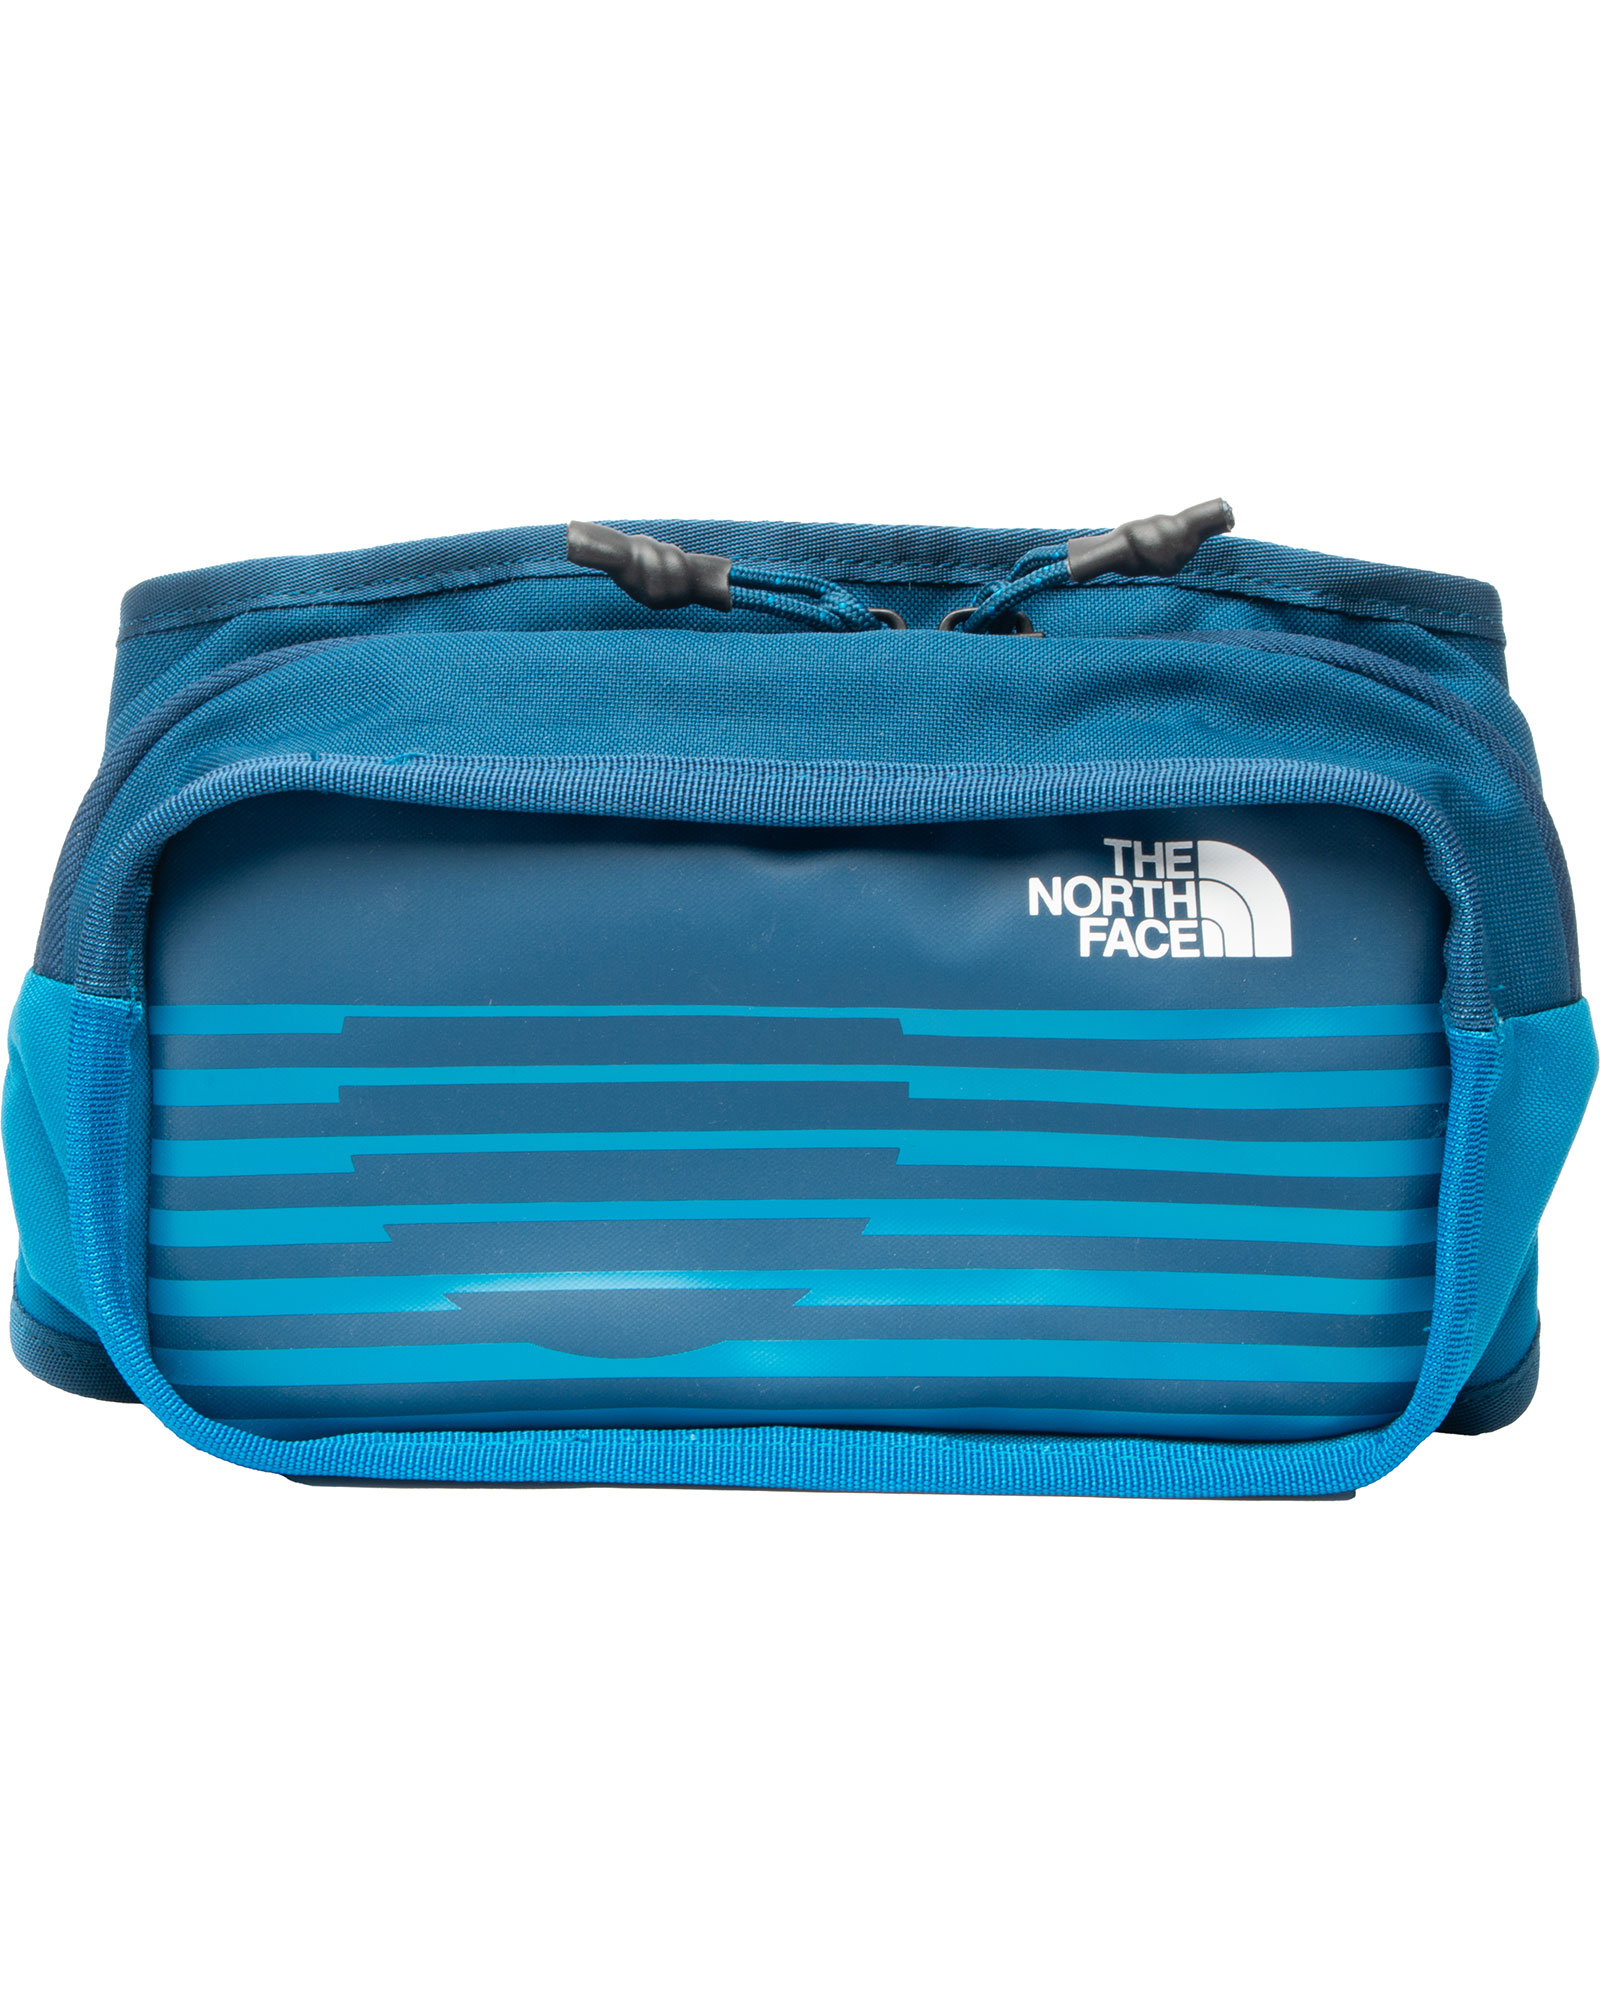 The North Face IC Hip Pack - Focus Blue/Medievil Blue